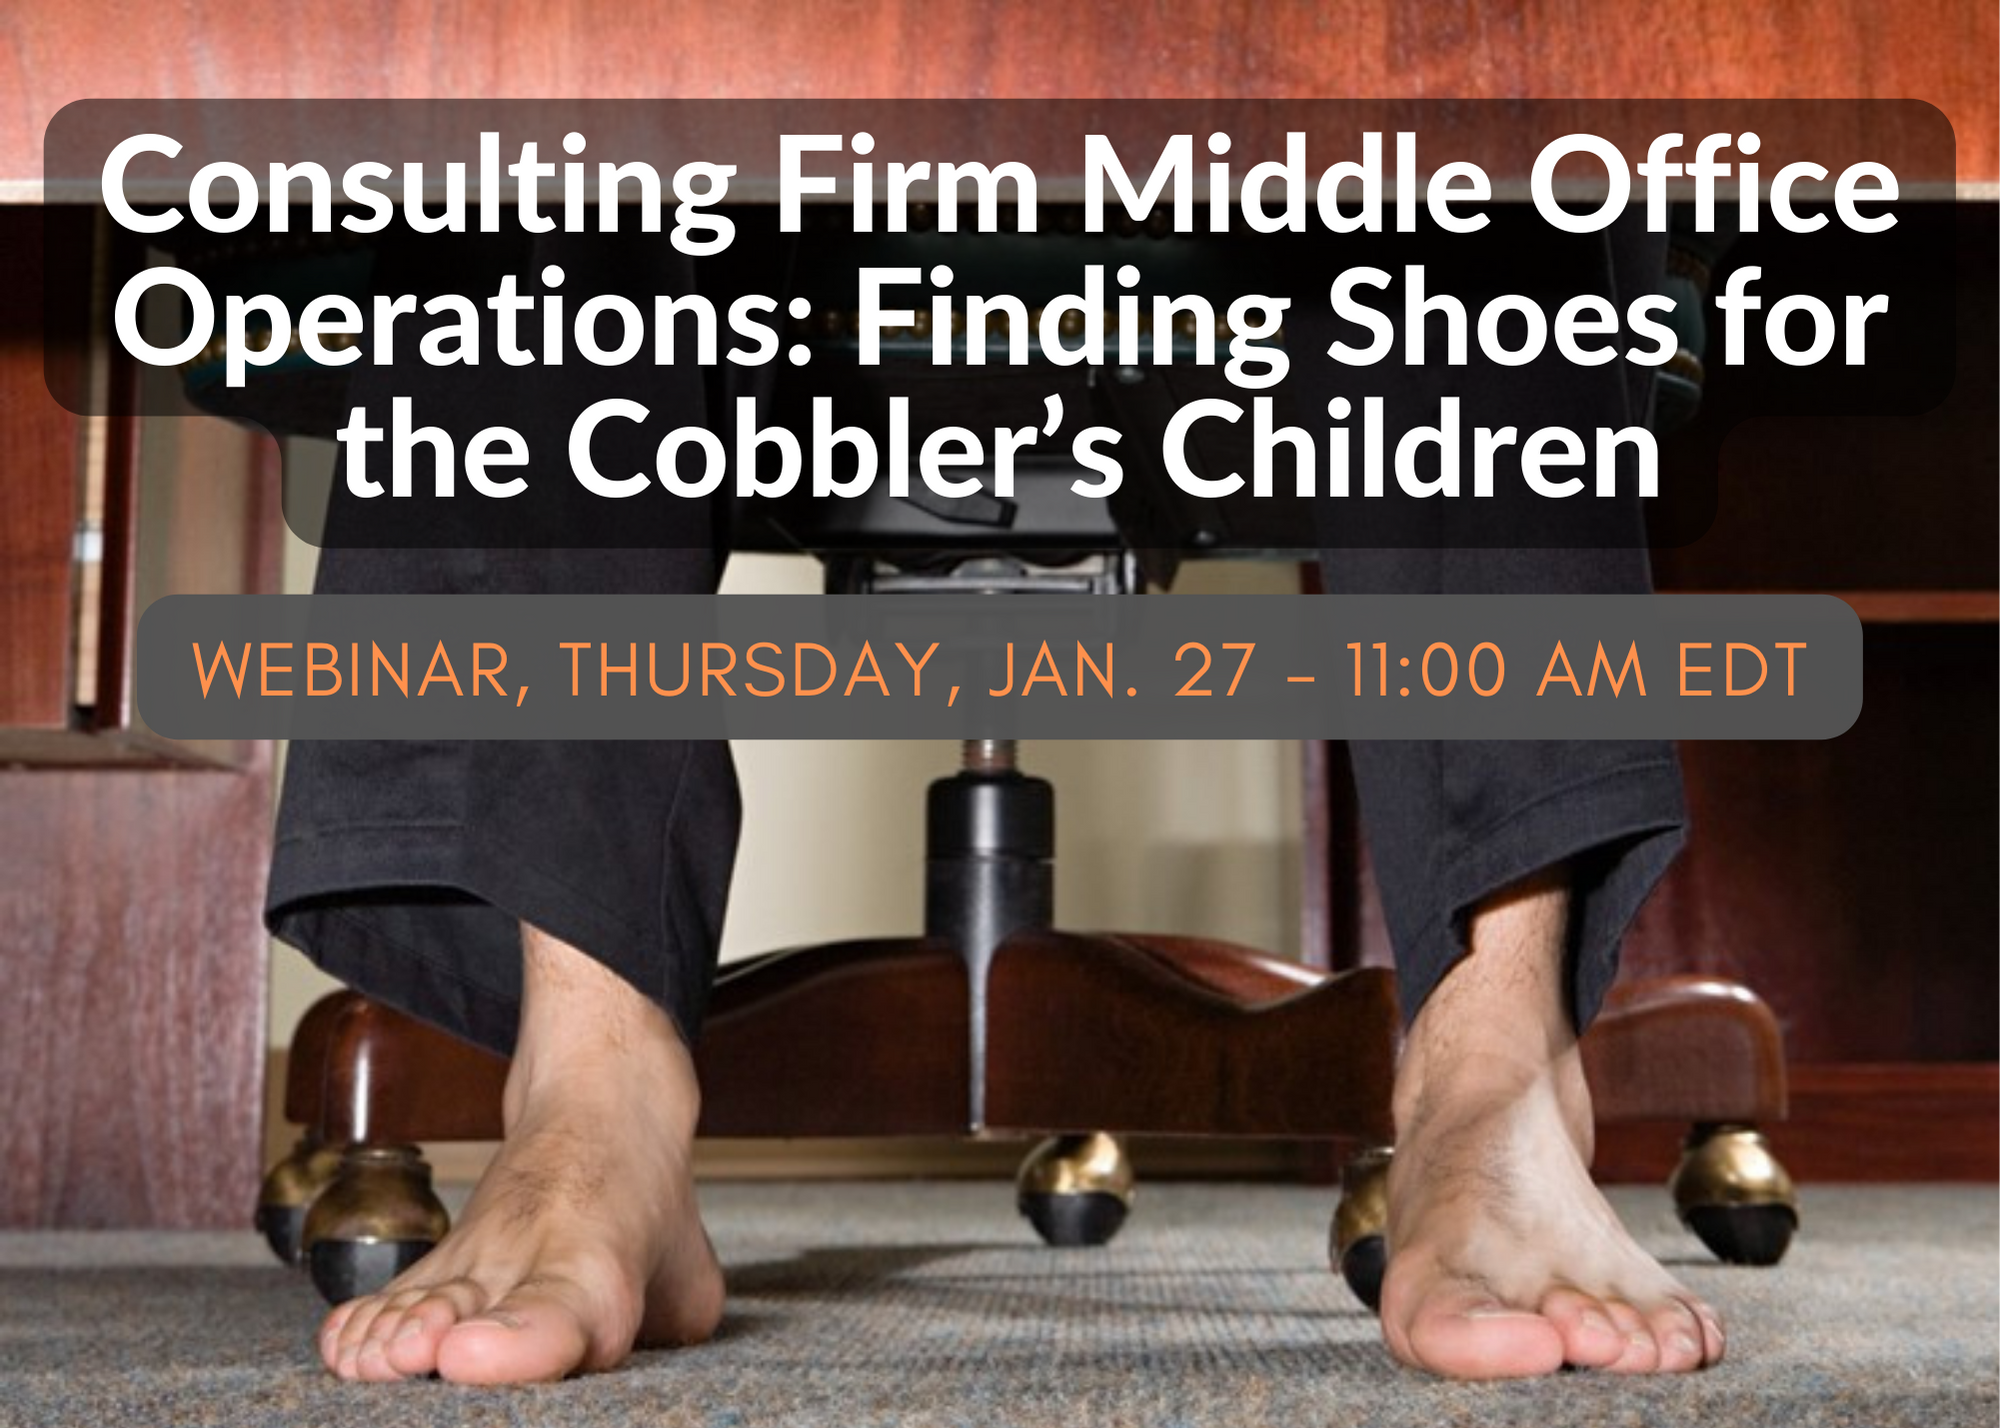 Webinar - Consulting Firm Middle Office Operations: Finding Shoes for the Cobbler’s Children